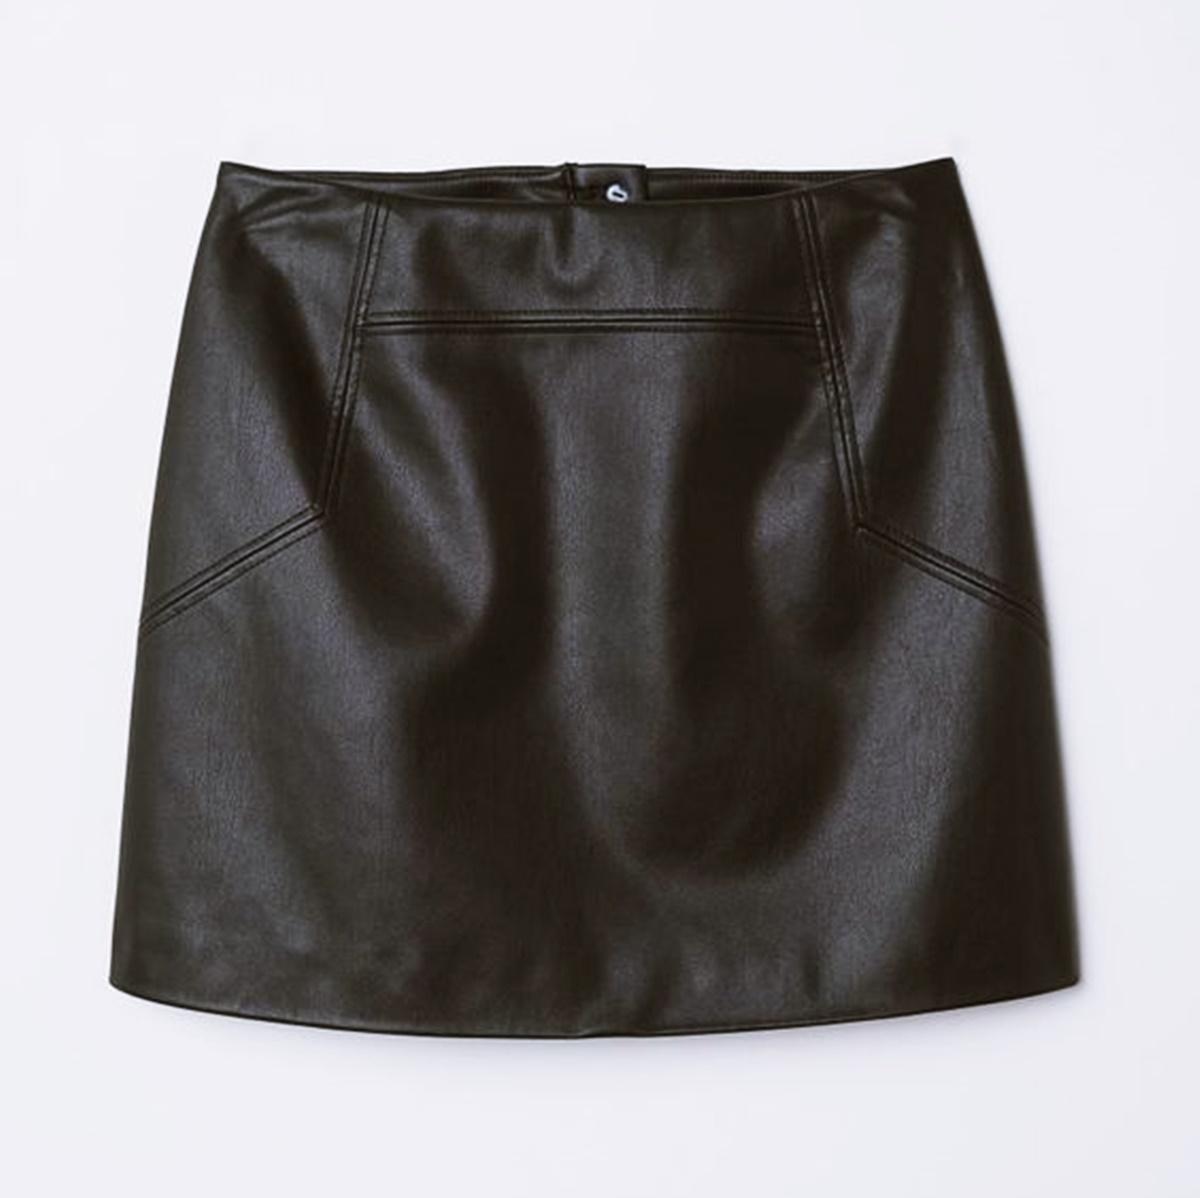 One leather skirt, four ways